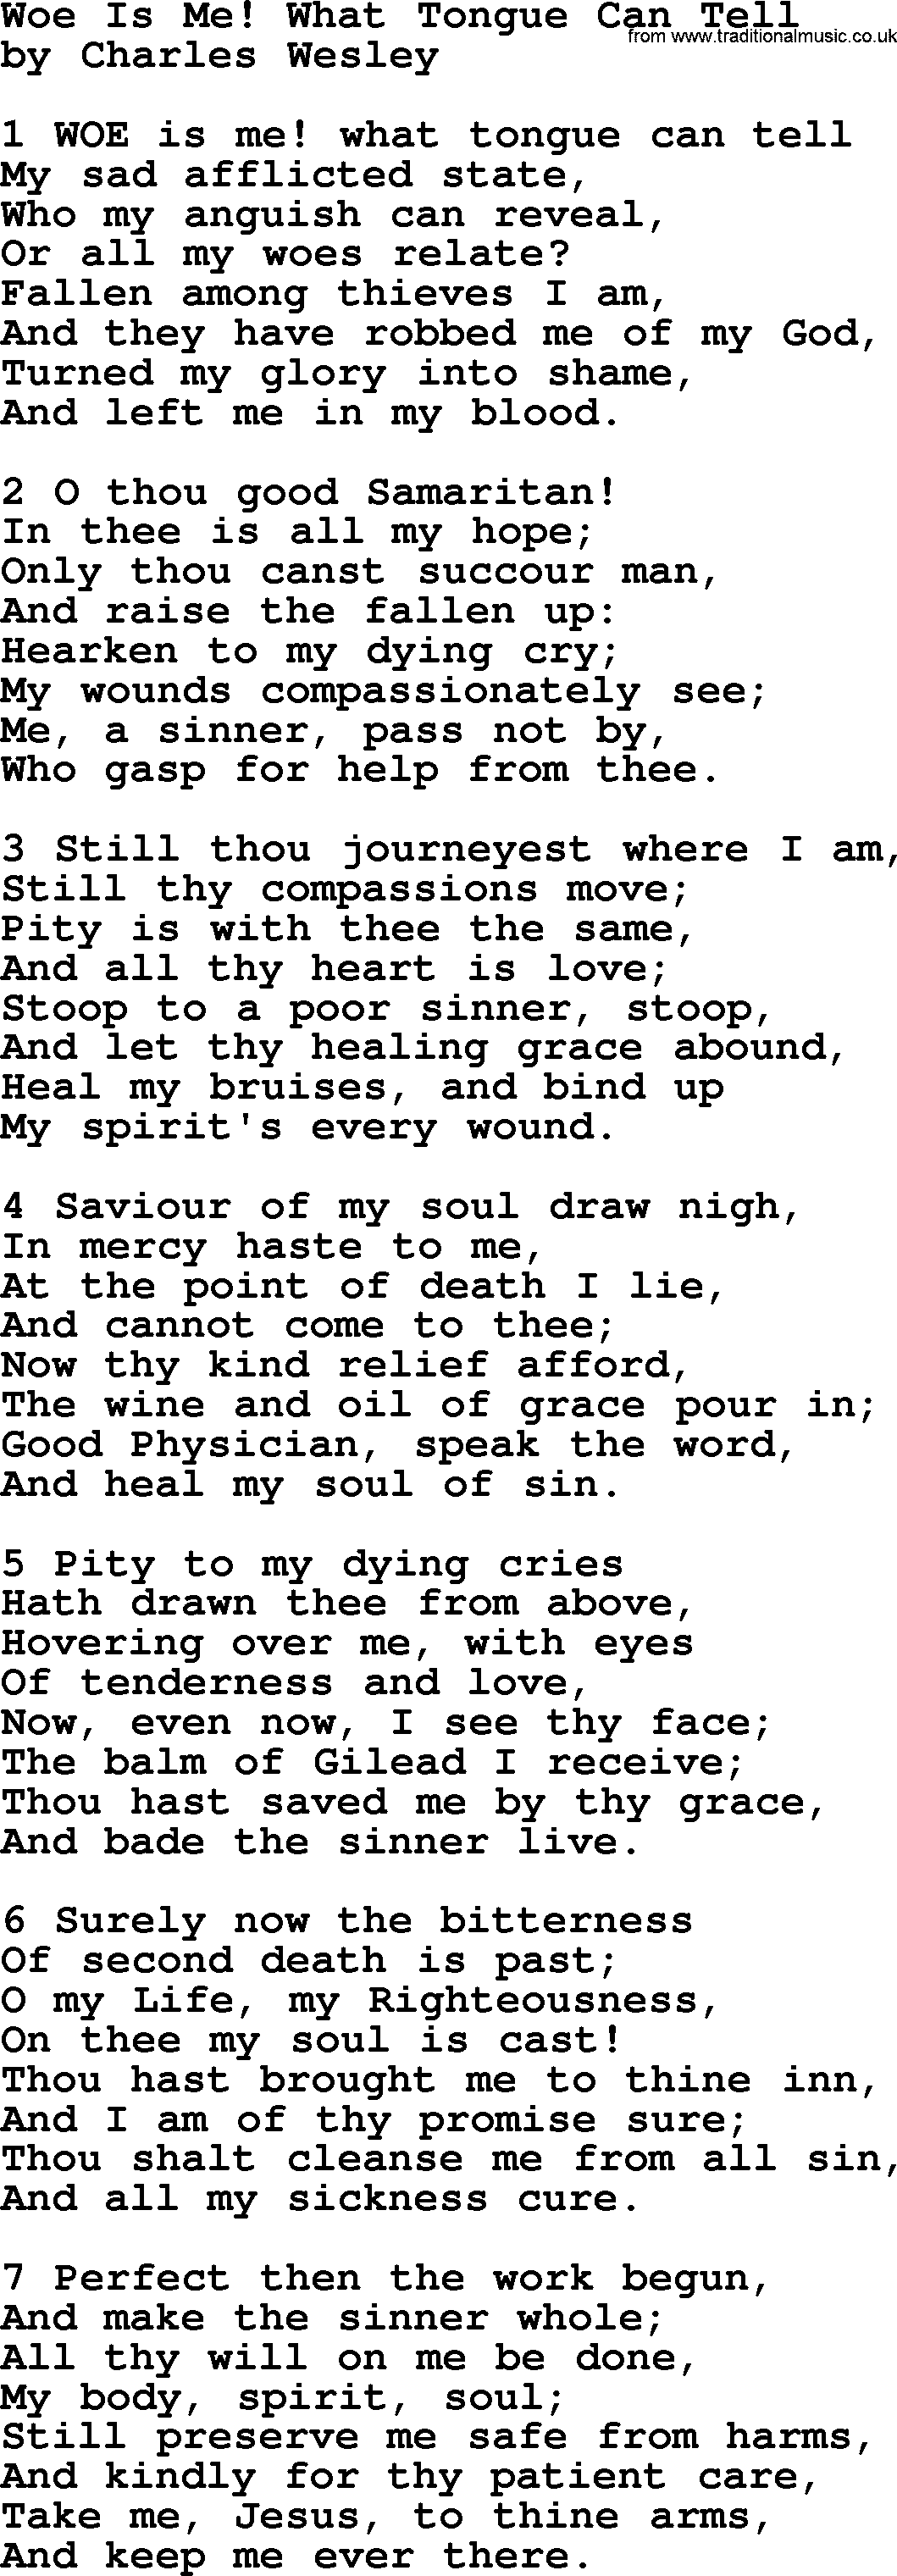 Charles Wesley hymn: Woe Is Me! What Tongue Can Tell, lyrics